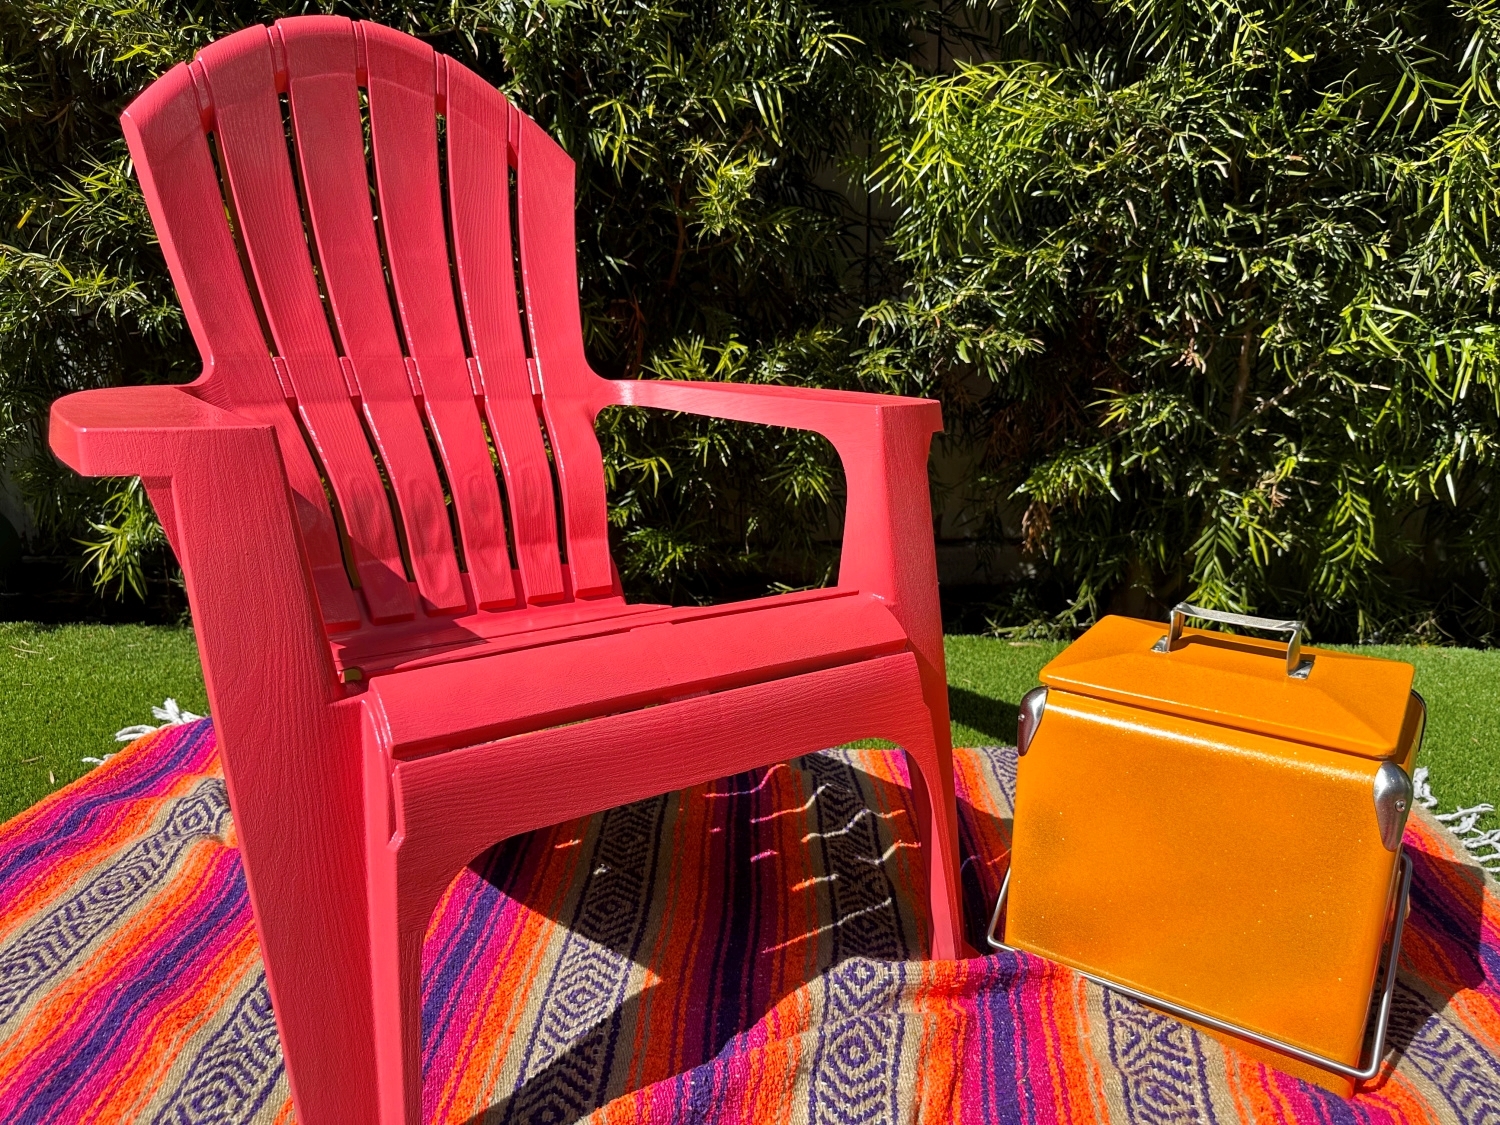 Prepare beach chair and cooler for painting